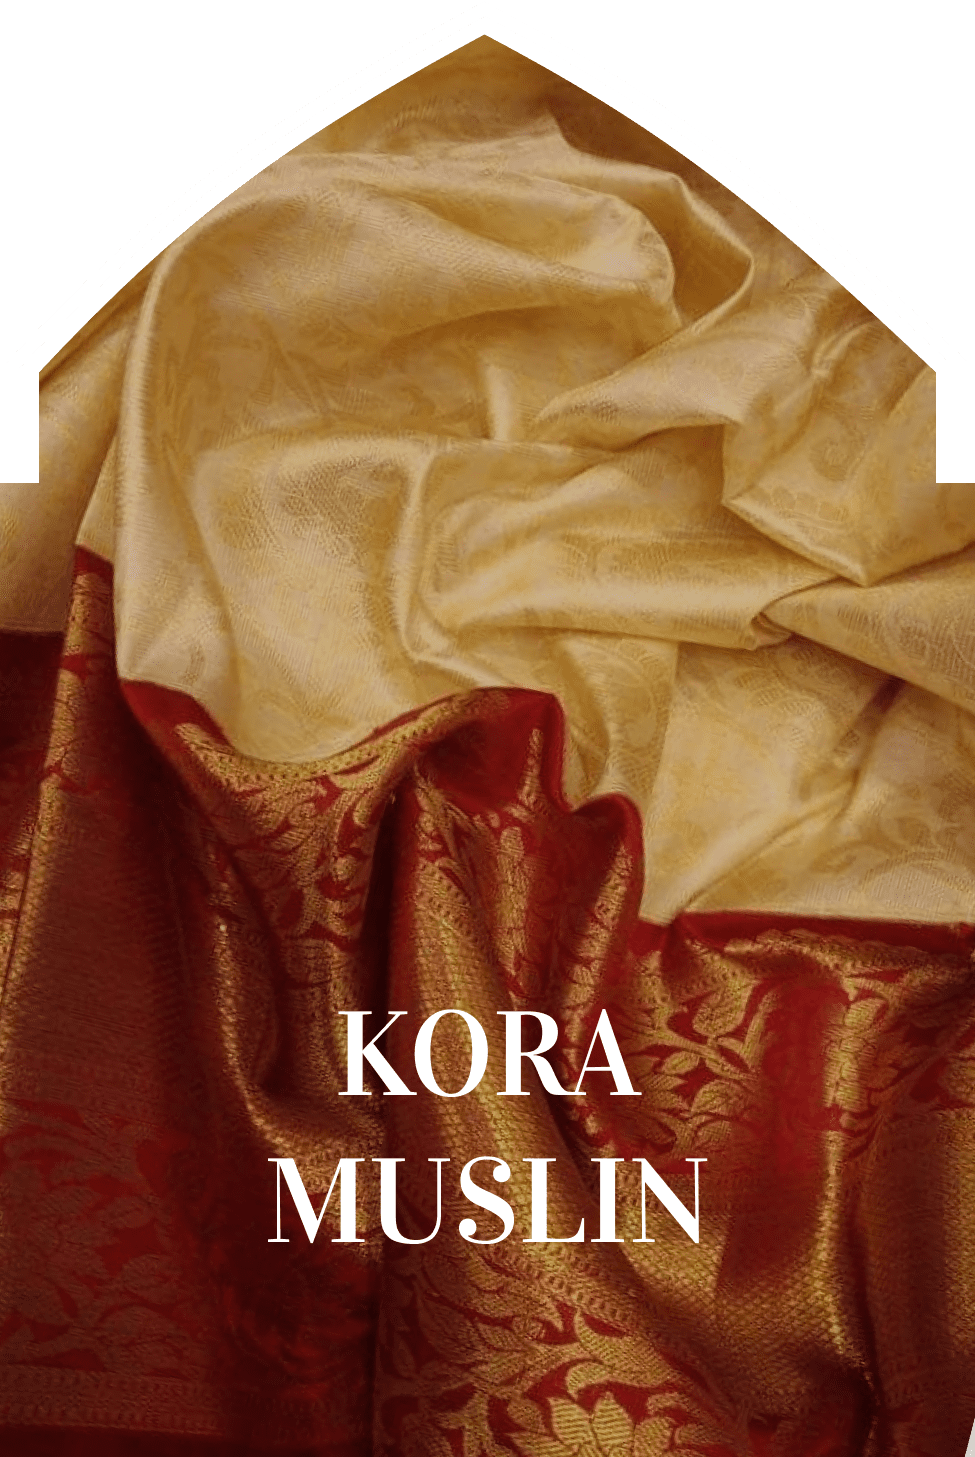 A beautiful kora muslin saree, known for its sheer and lightweight fabric, perfect for any occasion.